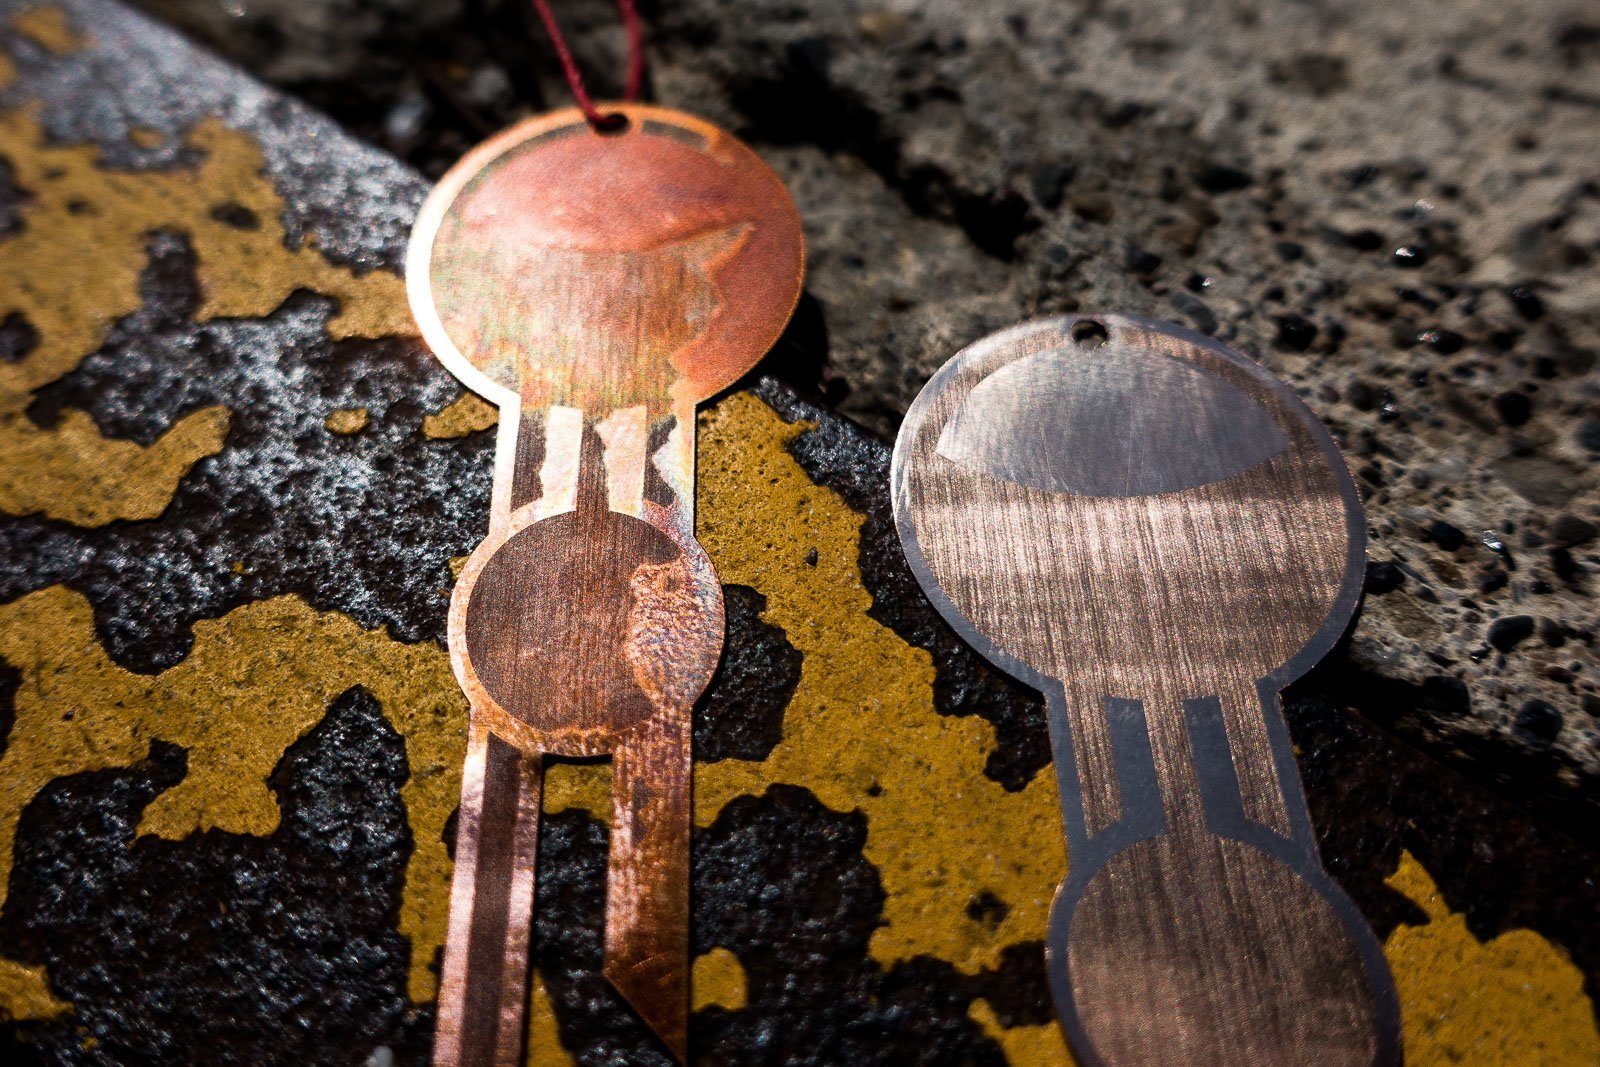 Details of lasercut geometric jewelery made from bronze engraved with a Trotec fiber laser